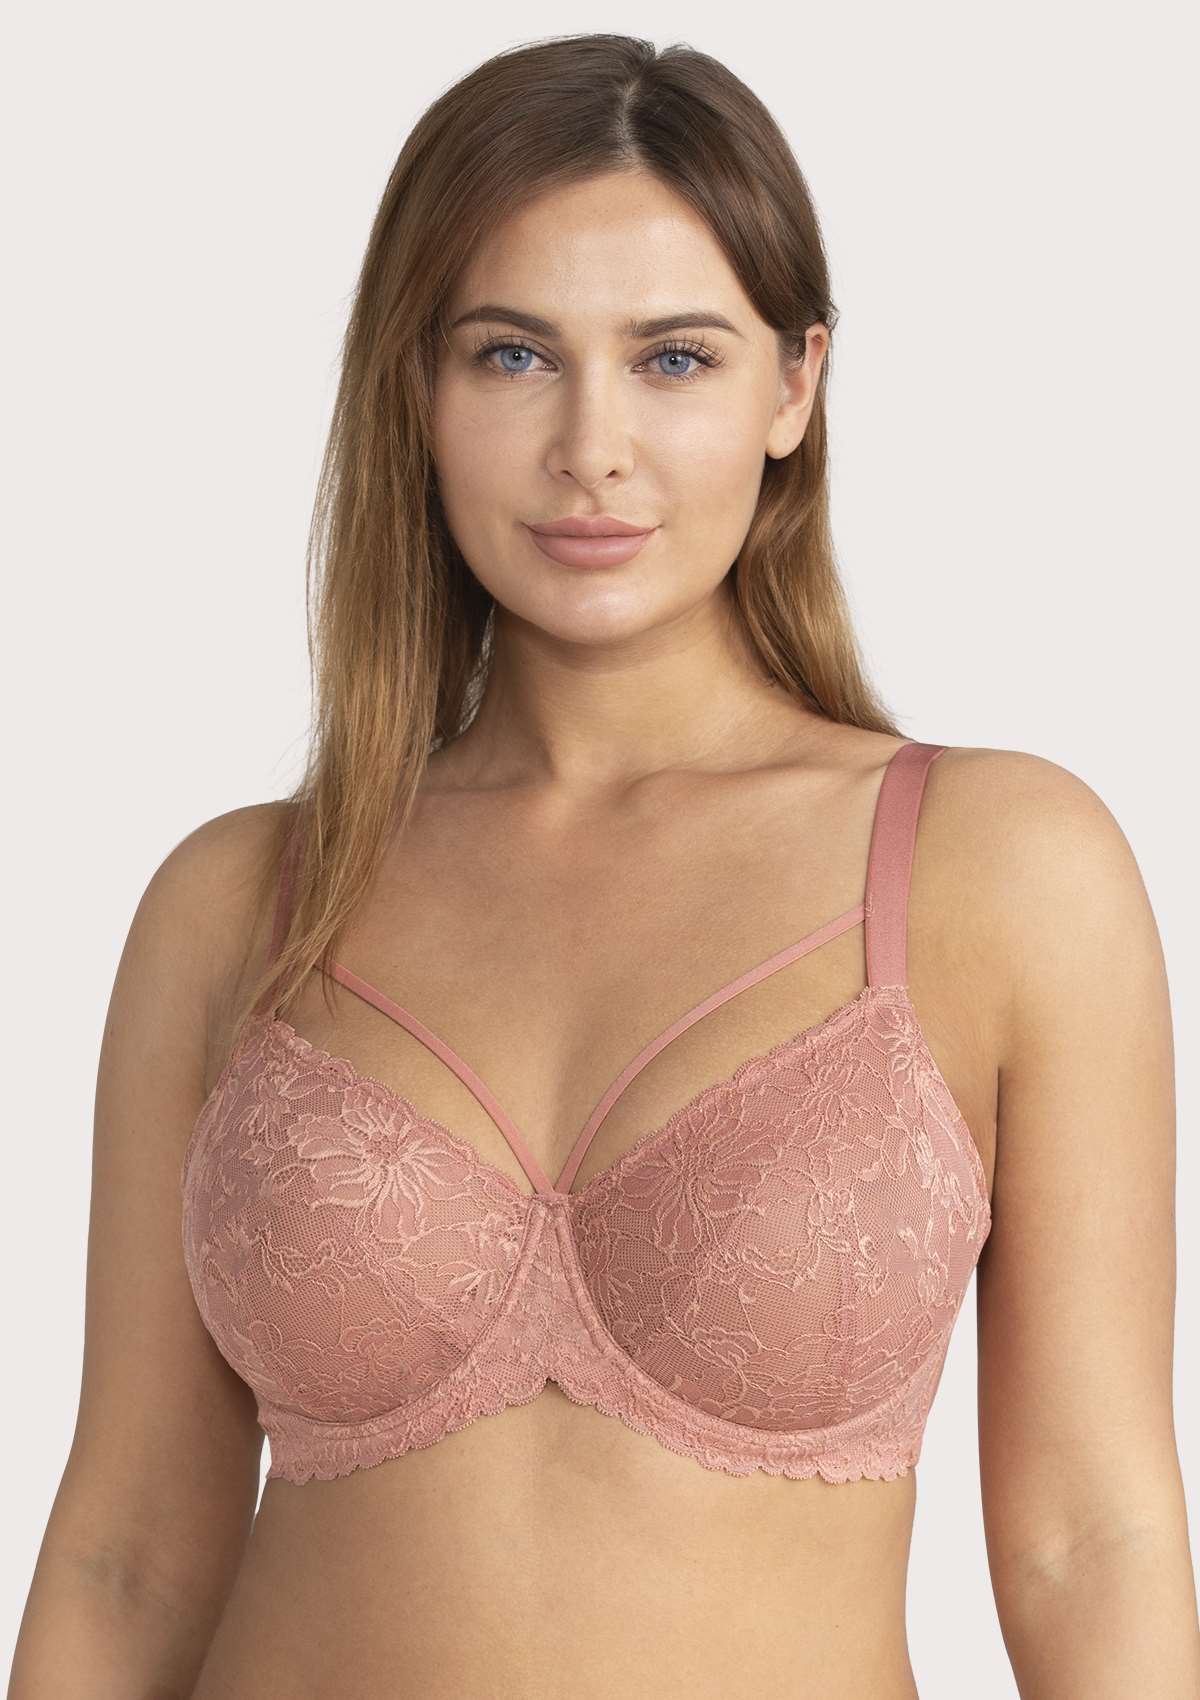 HSIA Pretty In Petals Lace Bra And Panty Sets: Bra For Big Boobs - Light Coral / 38 / DDD/F